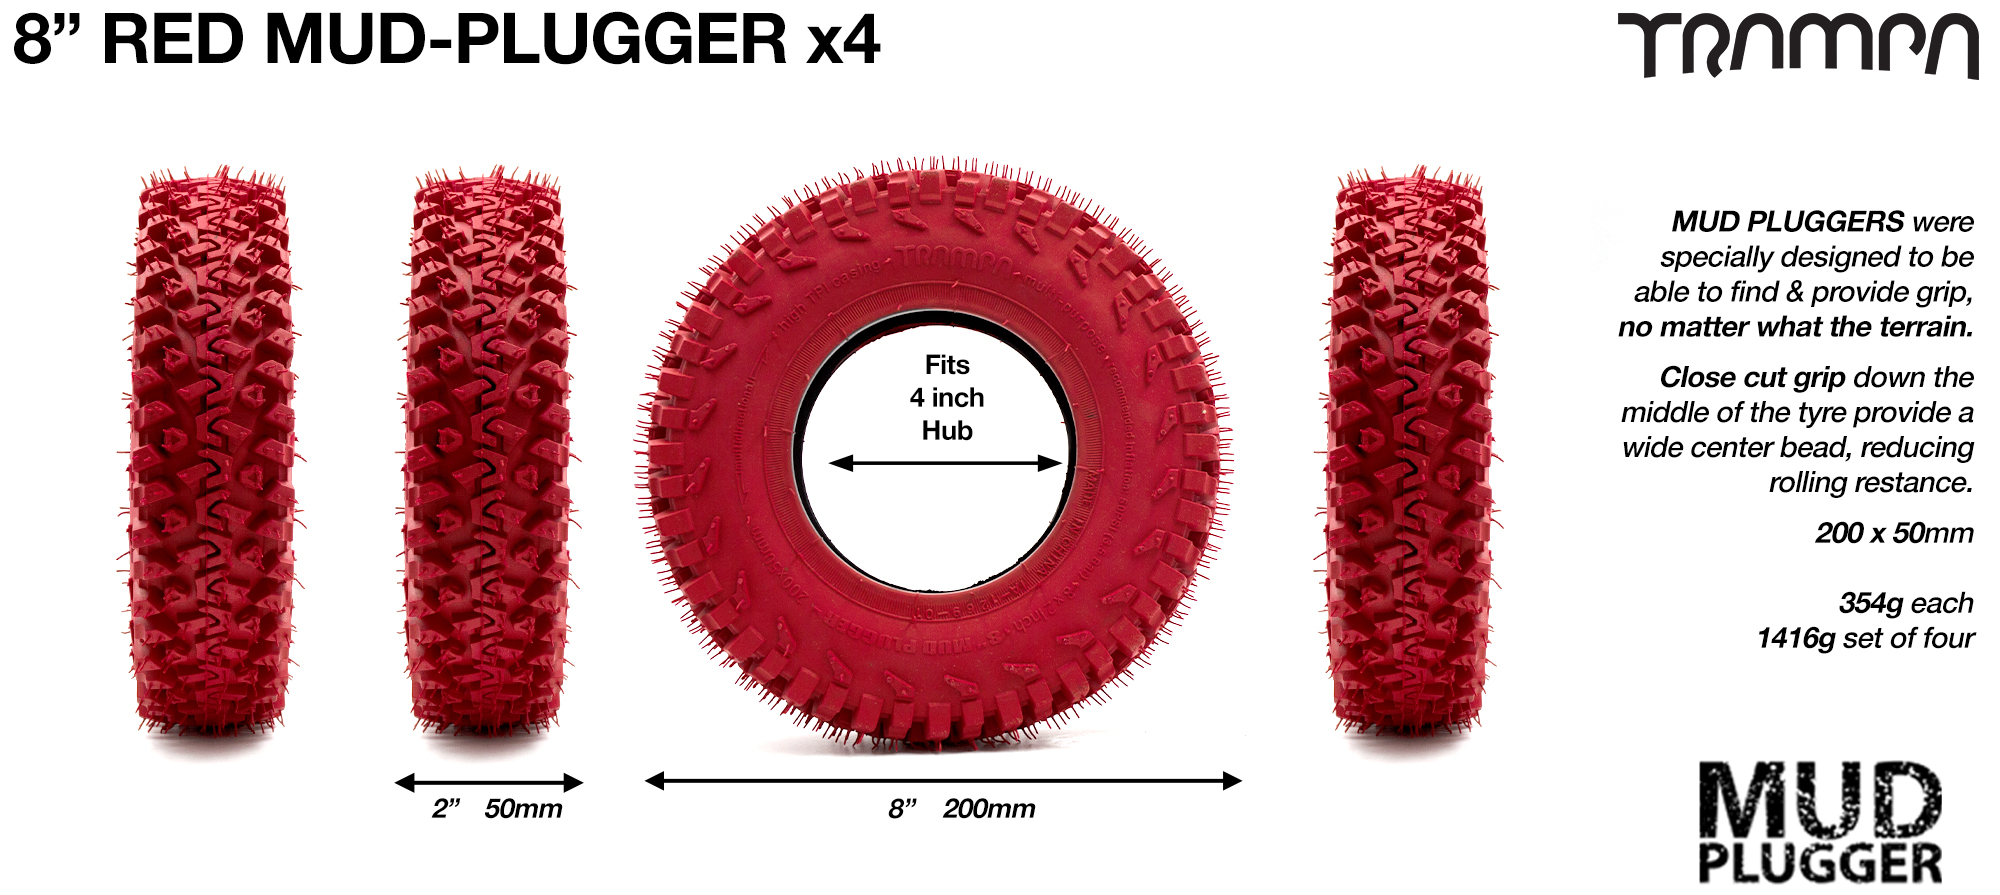 TRAMPA MUD-PLUGGER 8 Inch Tyre measure 3.75x 2x 8 Inch or 200x50mm with 3.75 Inch Rim fits all 4 Inch Hubs - Set of 4